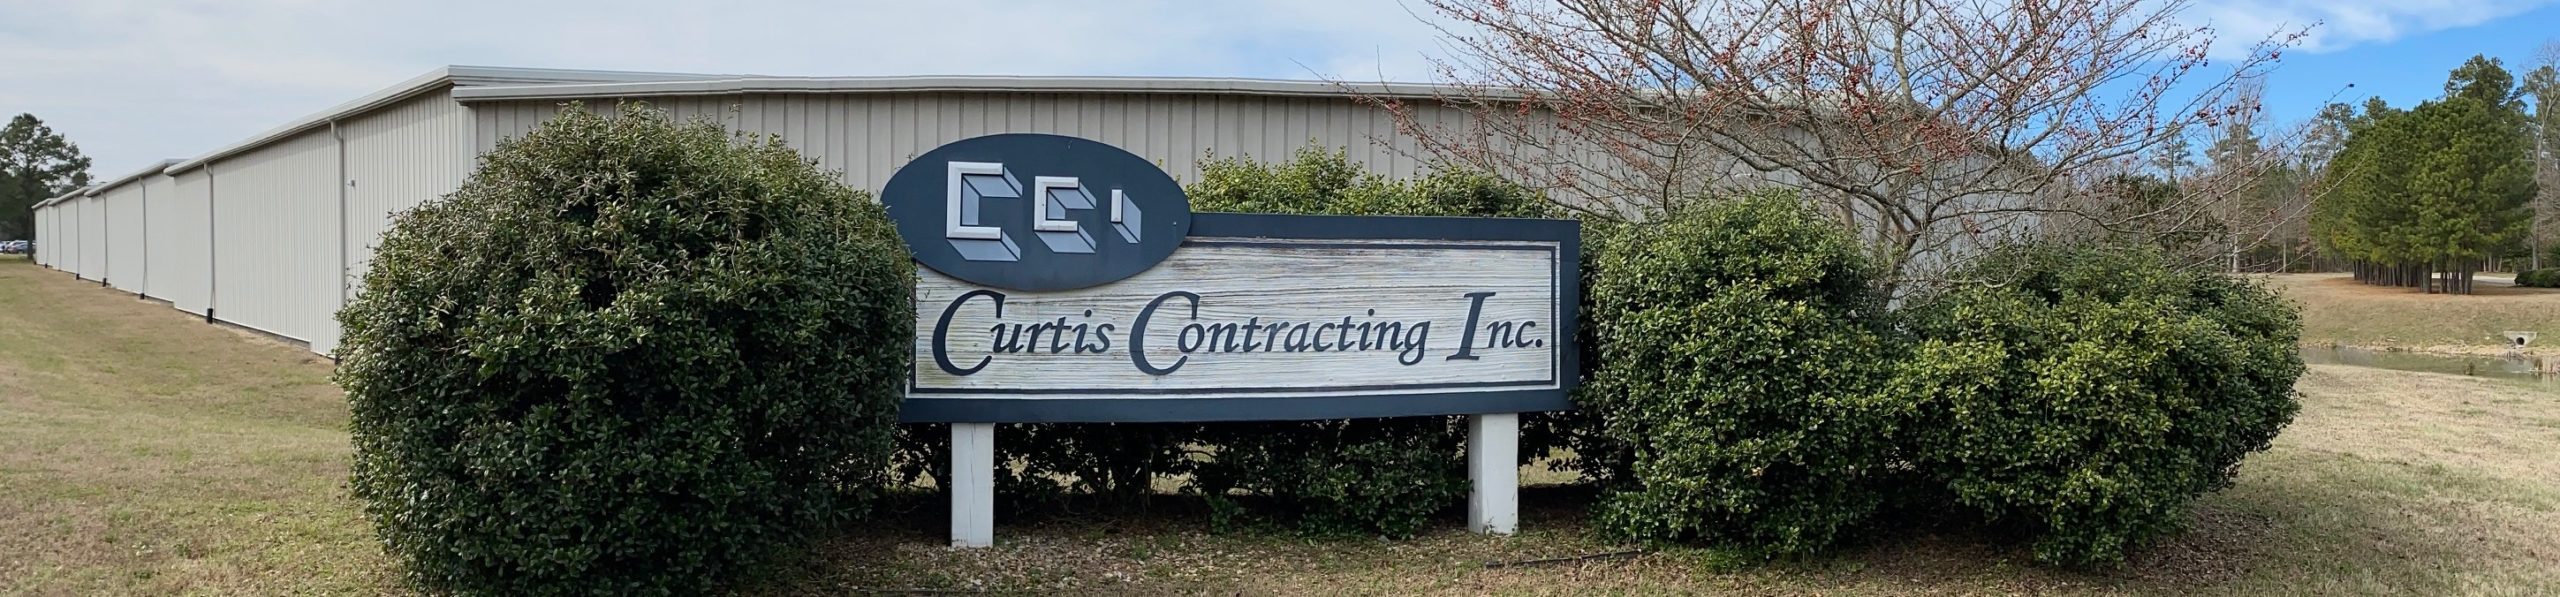 About Curtis Contracting